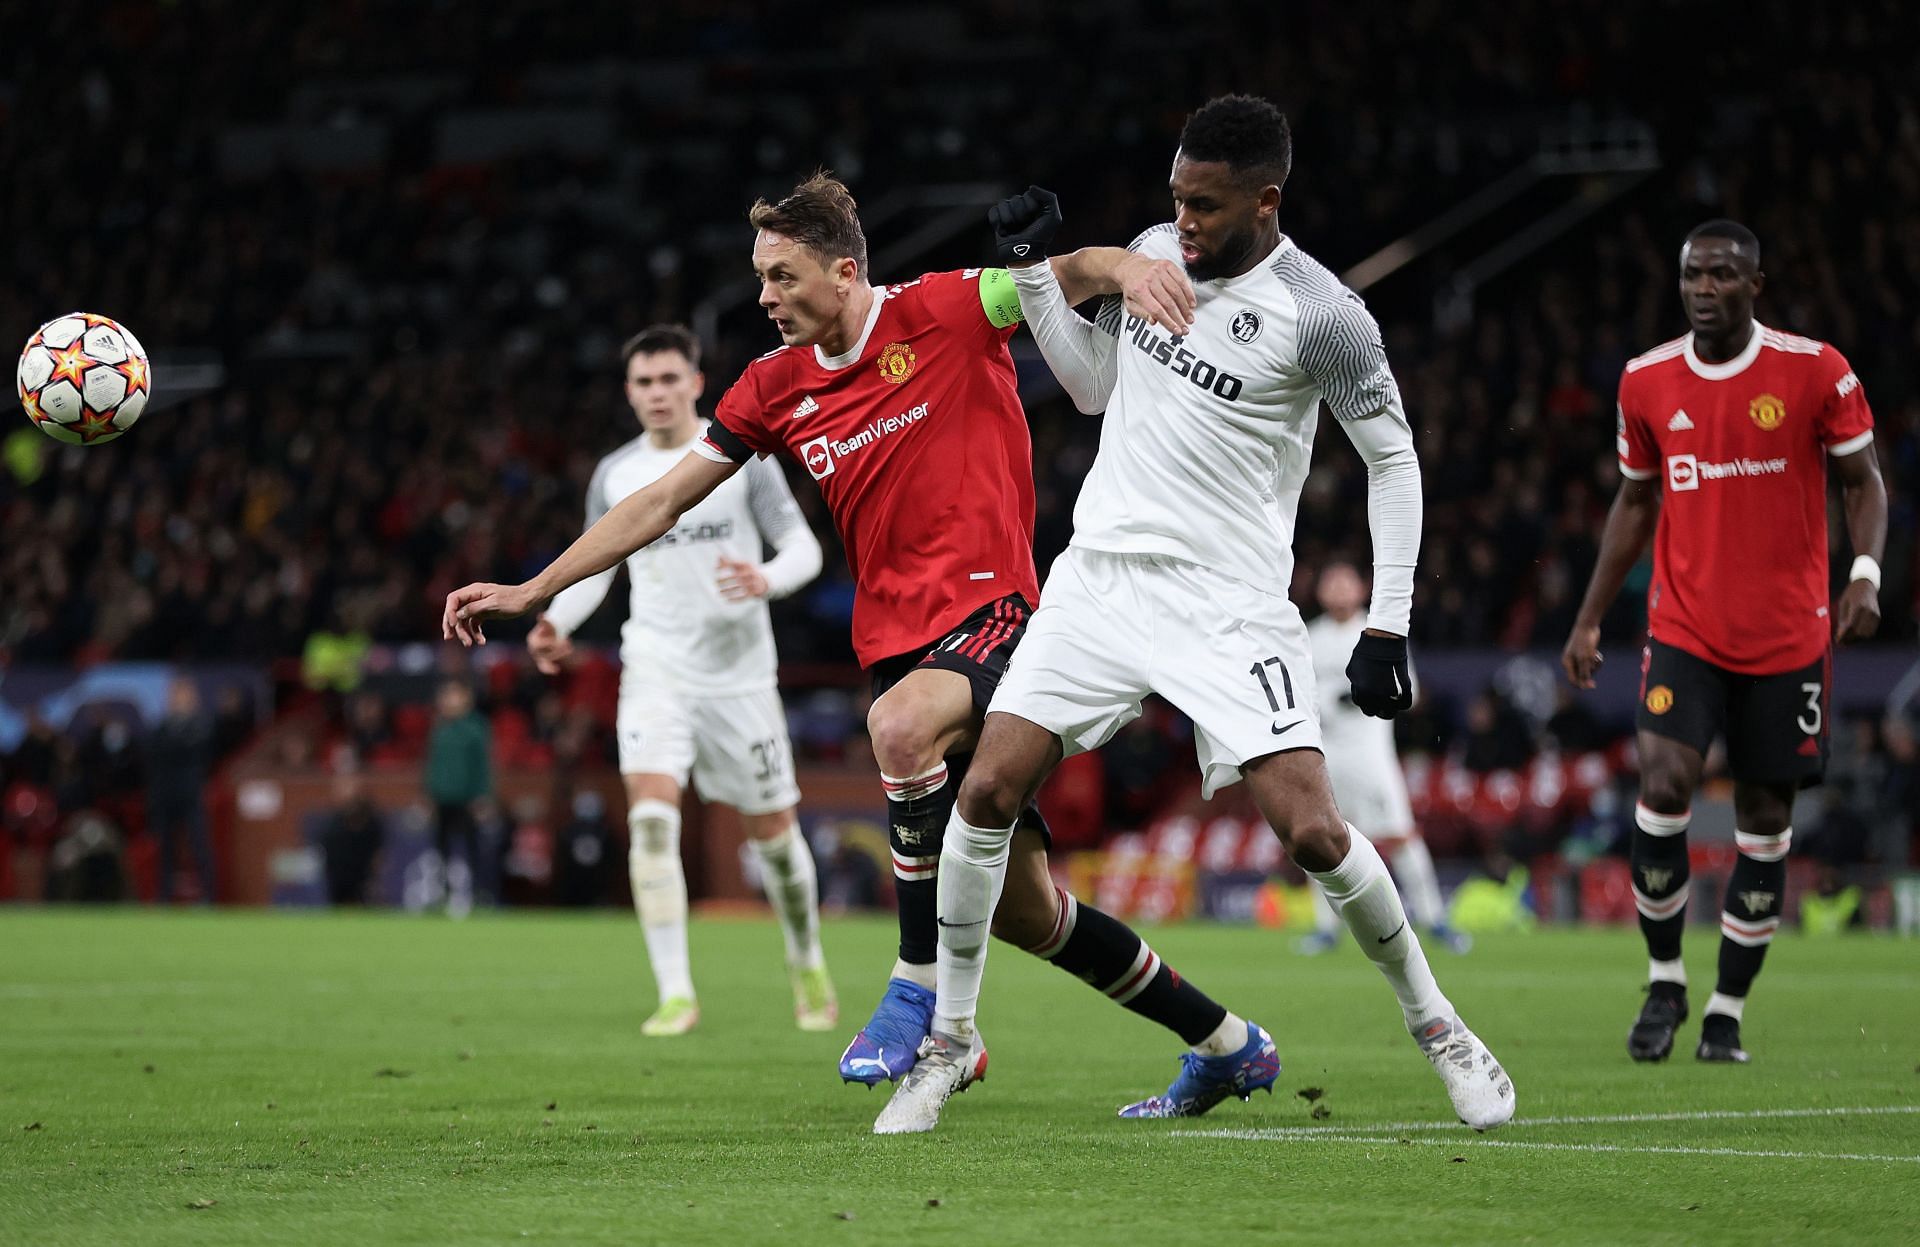 Manchester United and BSC Young Boys played out a 1-1 draw on Wednesday.